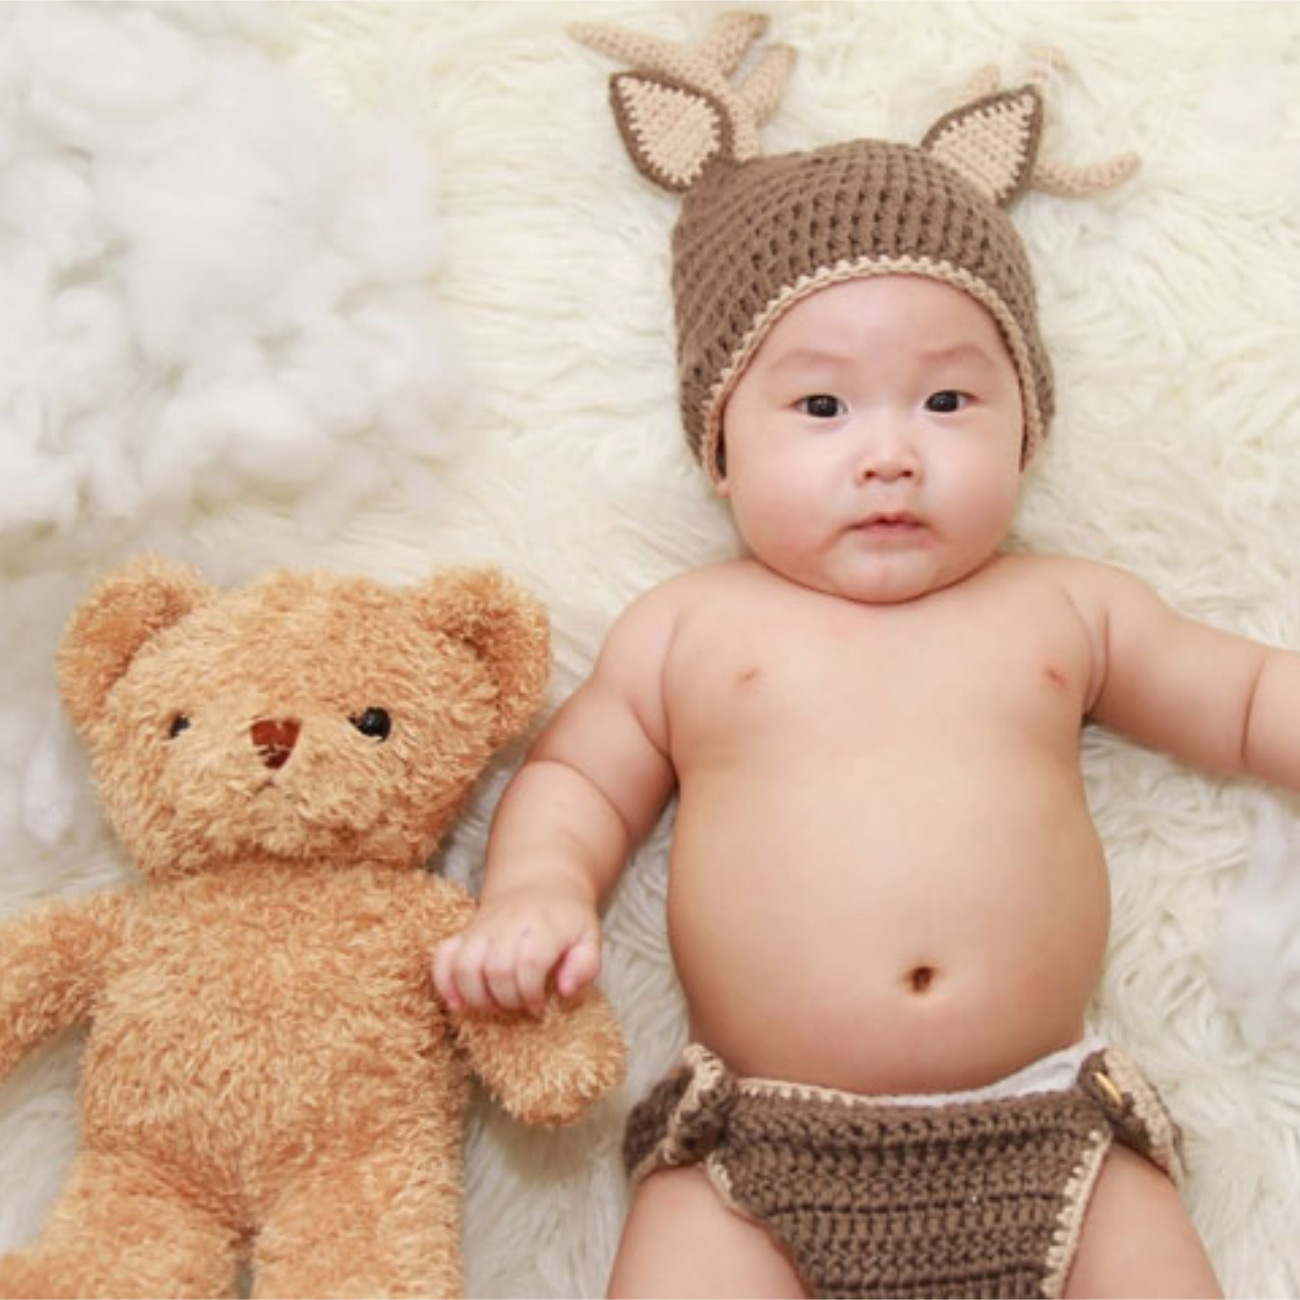 baby boy with knitted diaper and deer hat holding onto stuffed bear.